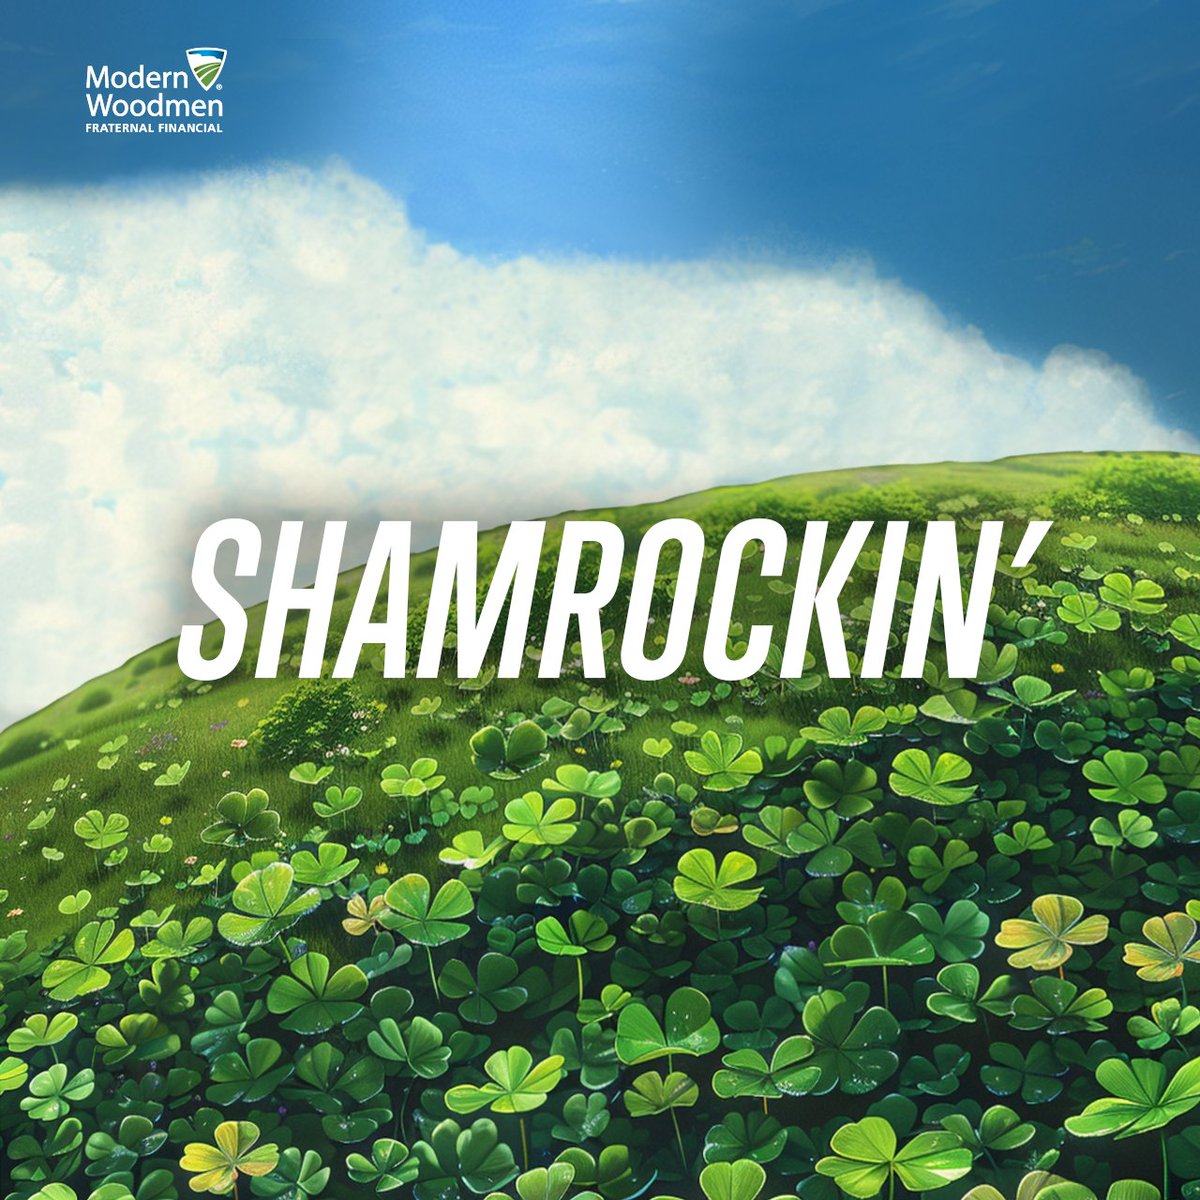 Have you listened to our playlist yet? Listen this weekend and get shamrockin' for St. Patrick's Day. spoti.fi/3TvcMZo